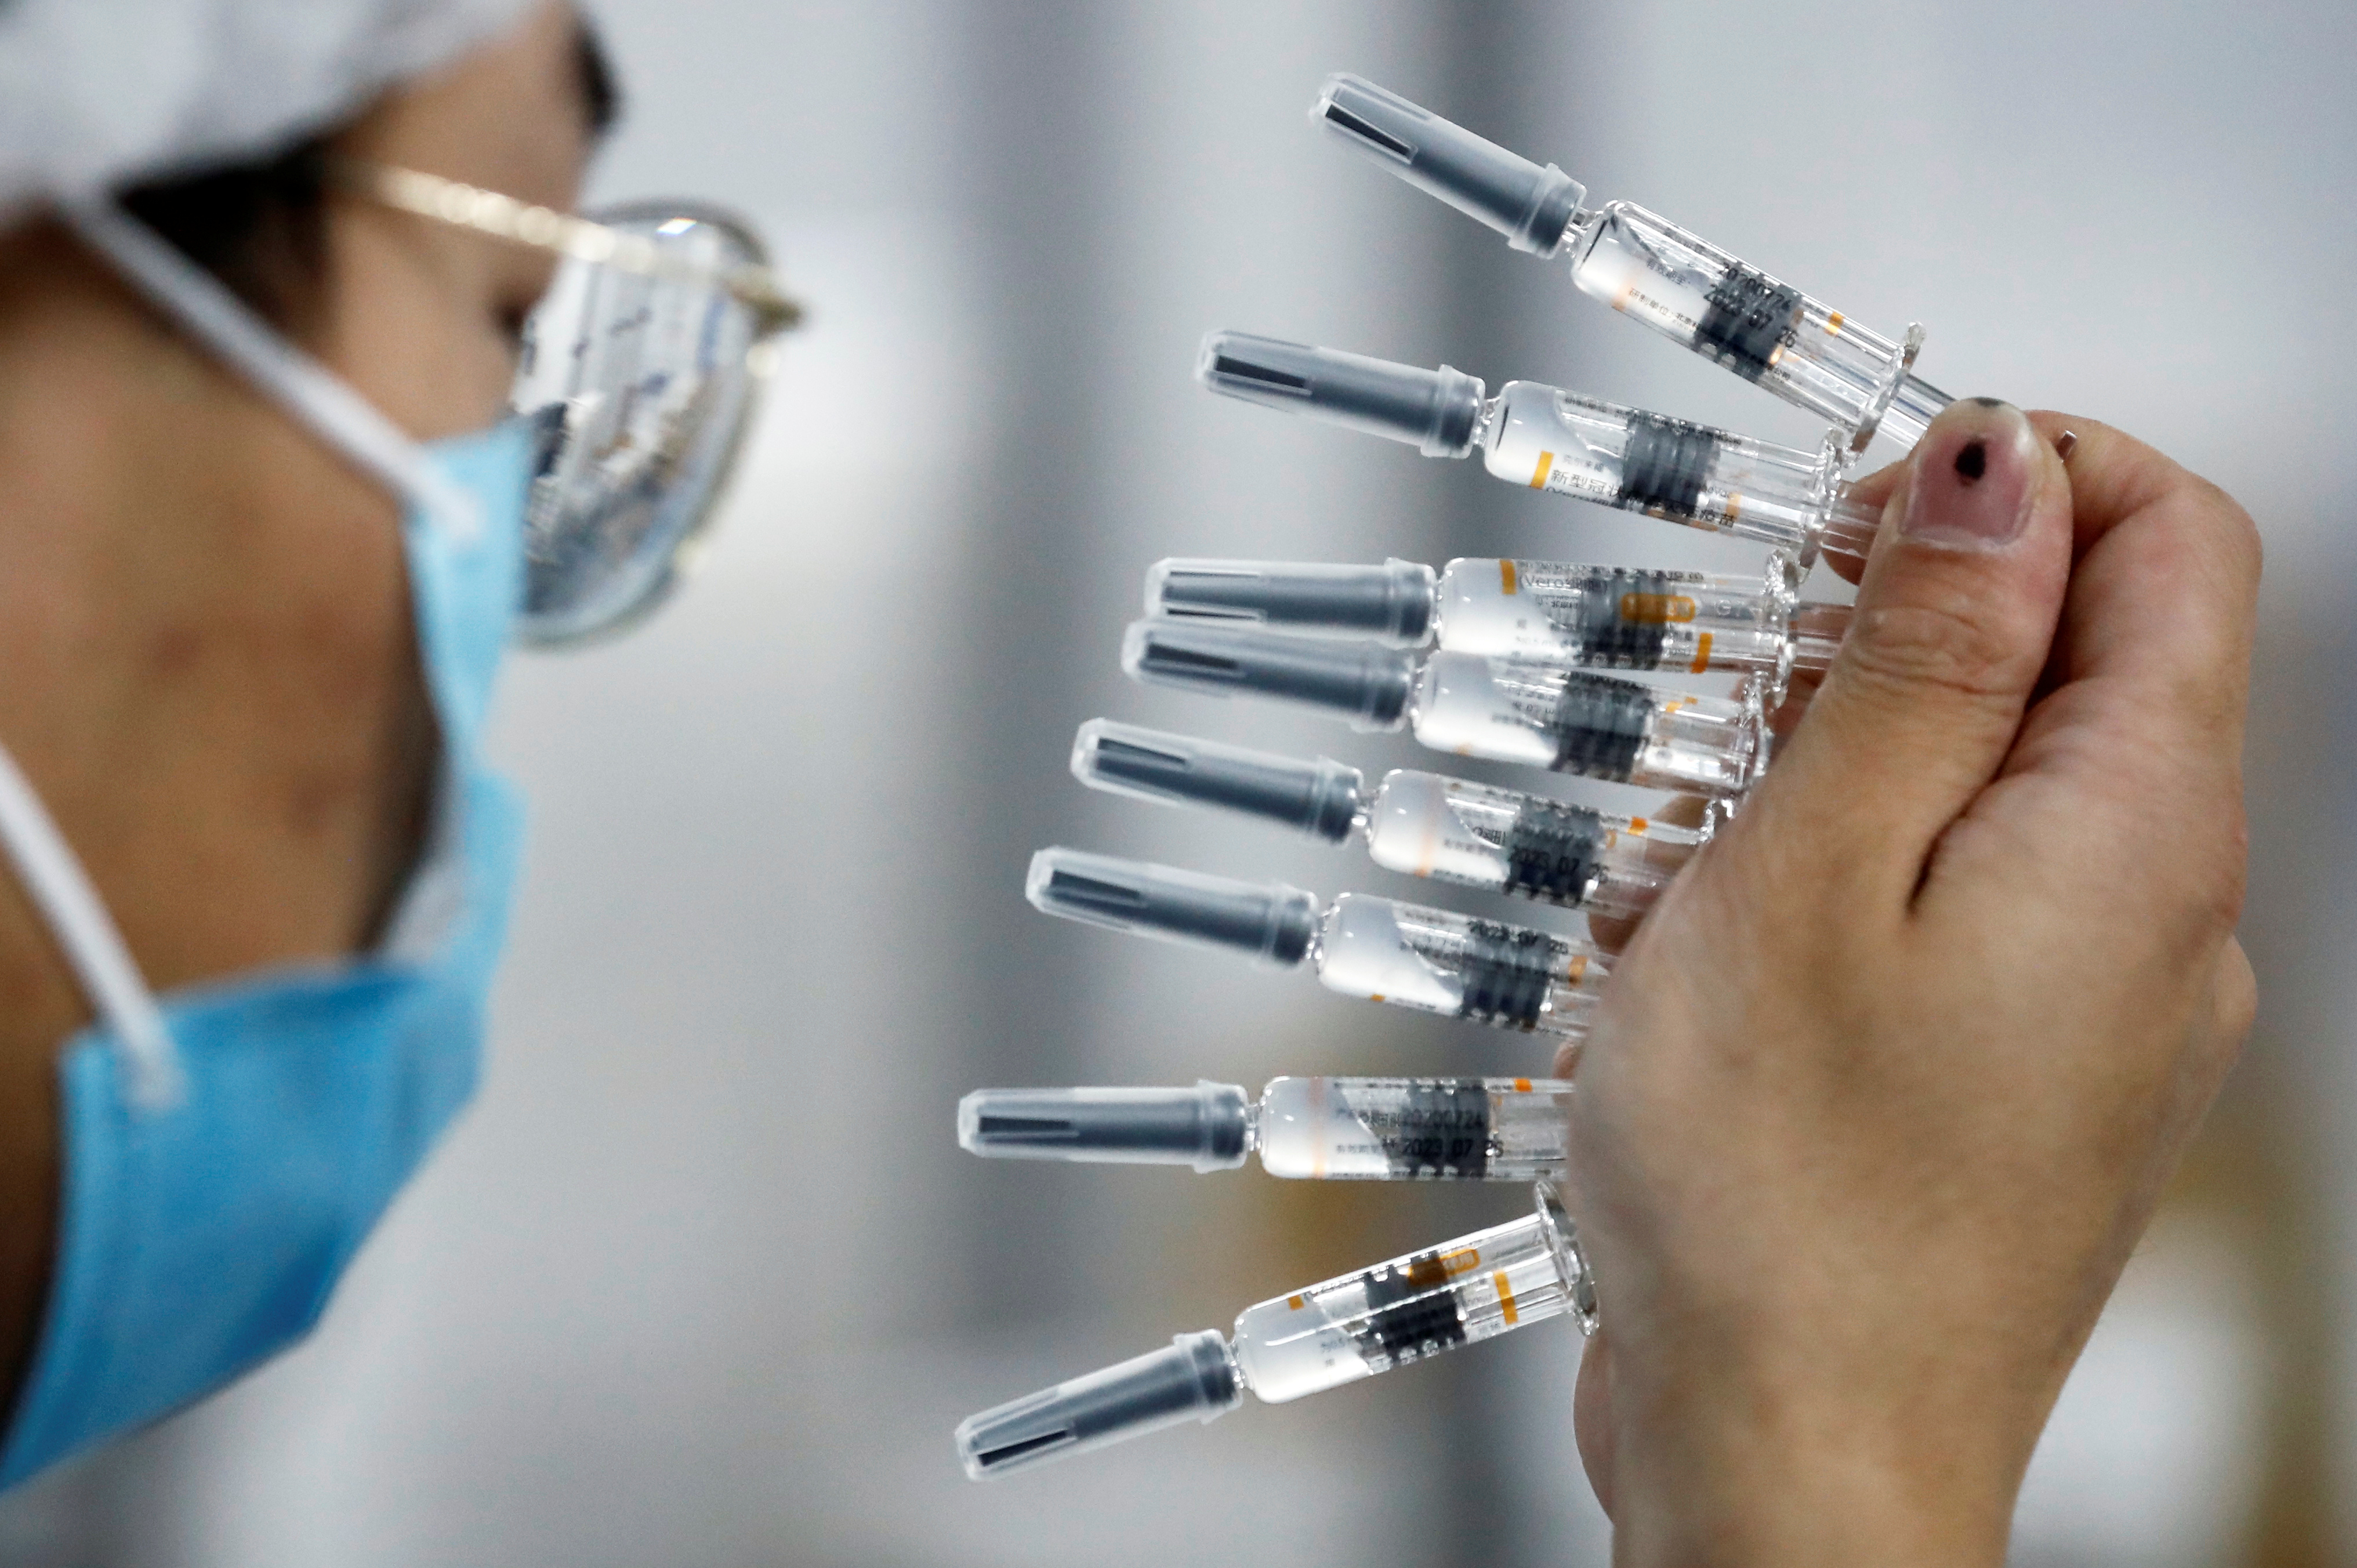 A worker performs a quality check in the packaging facility of Chinese vaccine maker Sinovac Biotech, developing an experimental coronavirus disease (COVID-19) vaccine, during a government-organized media tour in Beijing, China, September 24, 2020. REUTERS/Thomas Peter